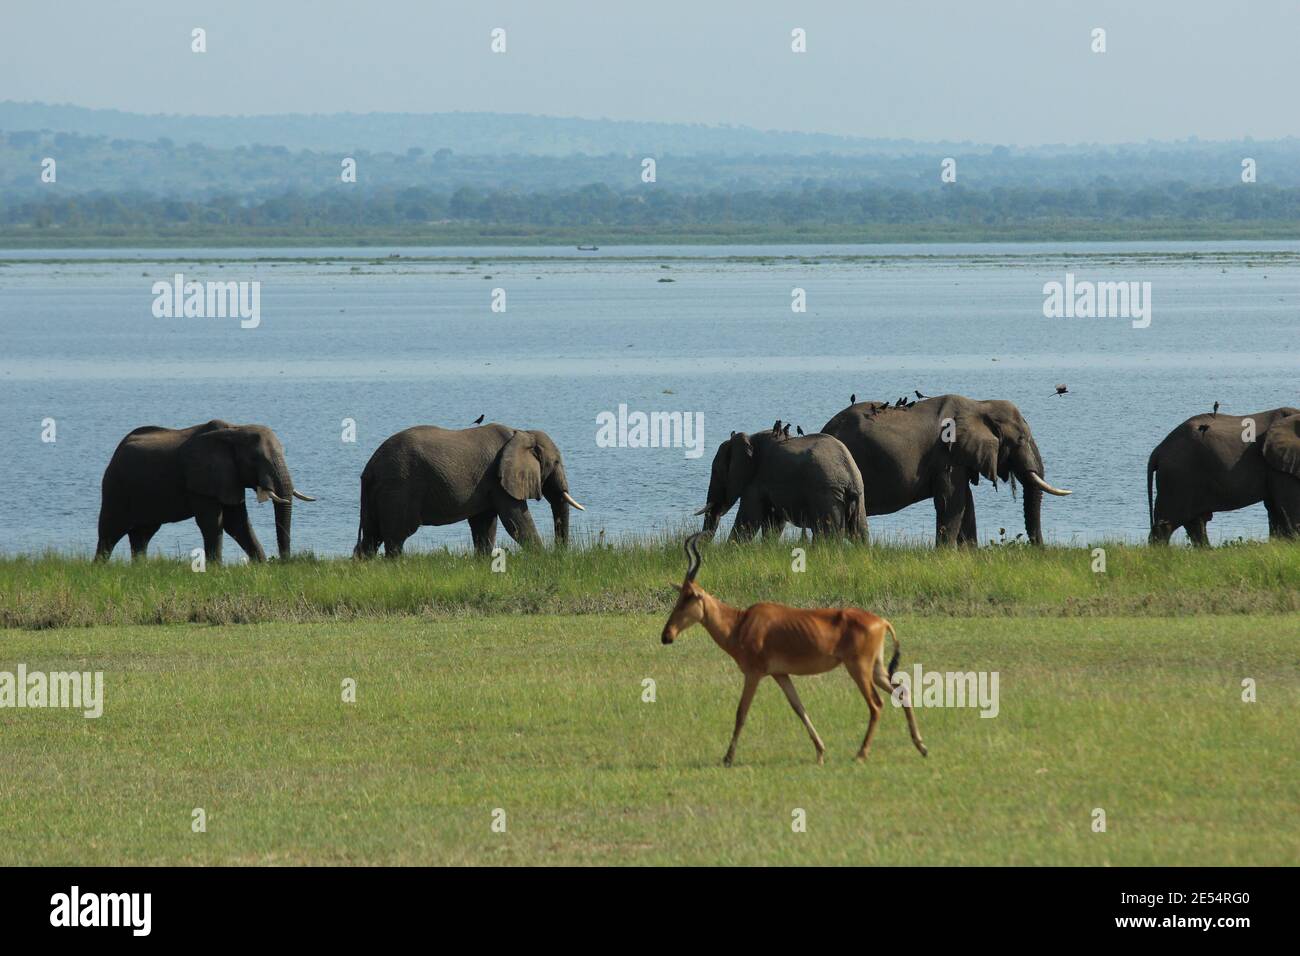 A Jackson's hartebeest walks along the banks of the Nile River in front of a herd of elephants in the Murchison Falls National Park in Uganda Stock Photo